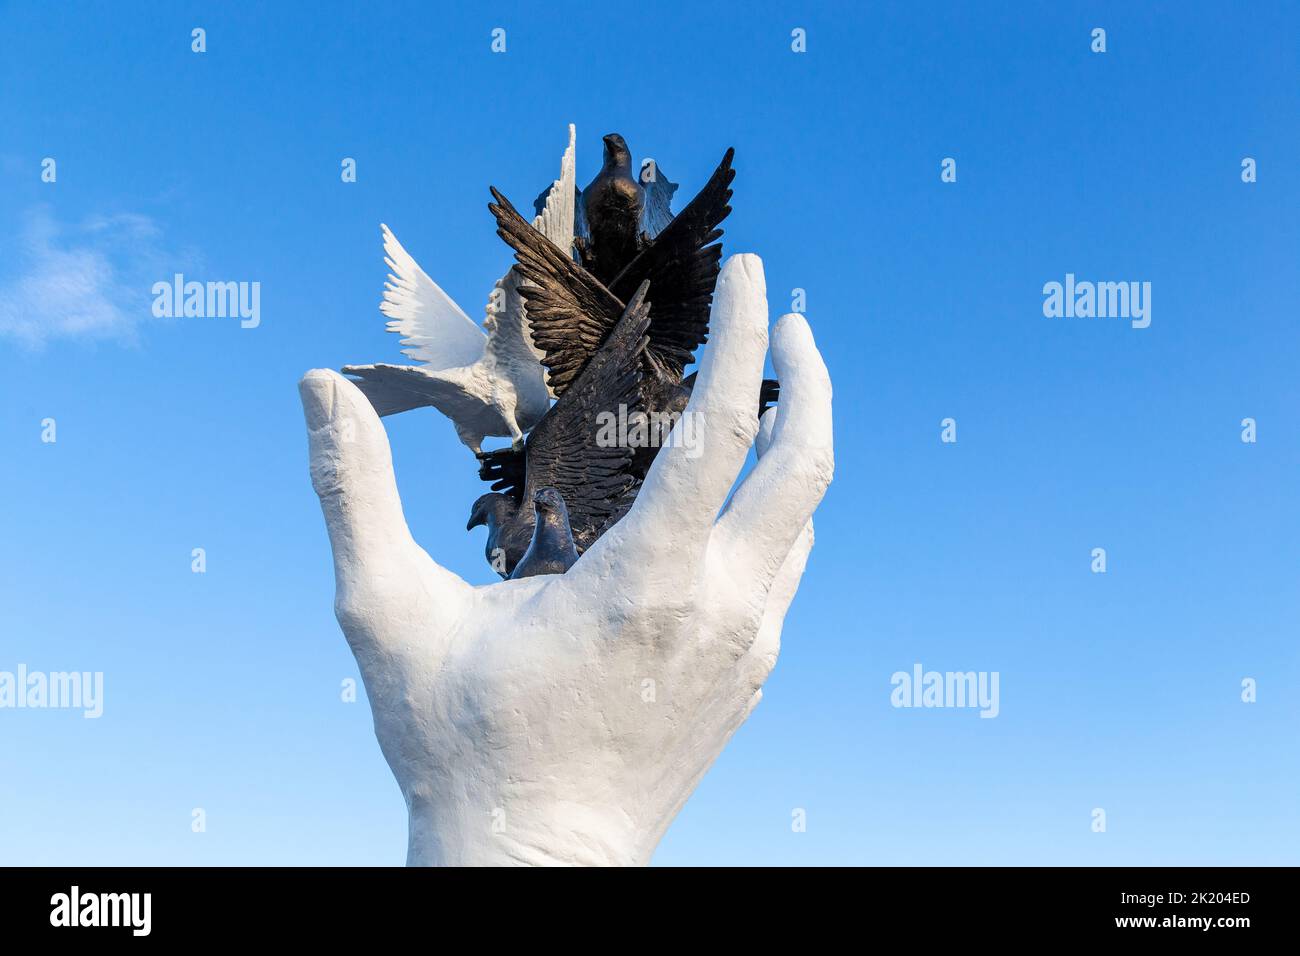 KUSADASI, TURKEY - JUNE 2, 2021: This is a fragment of the Hand of Peace monument on the embankment of the city. Stock Photo